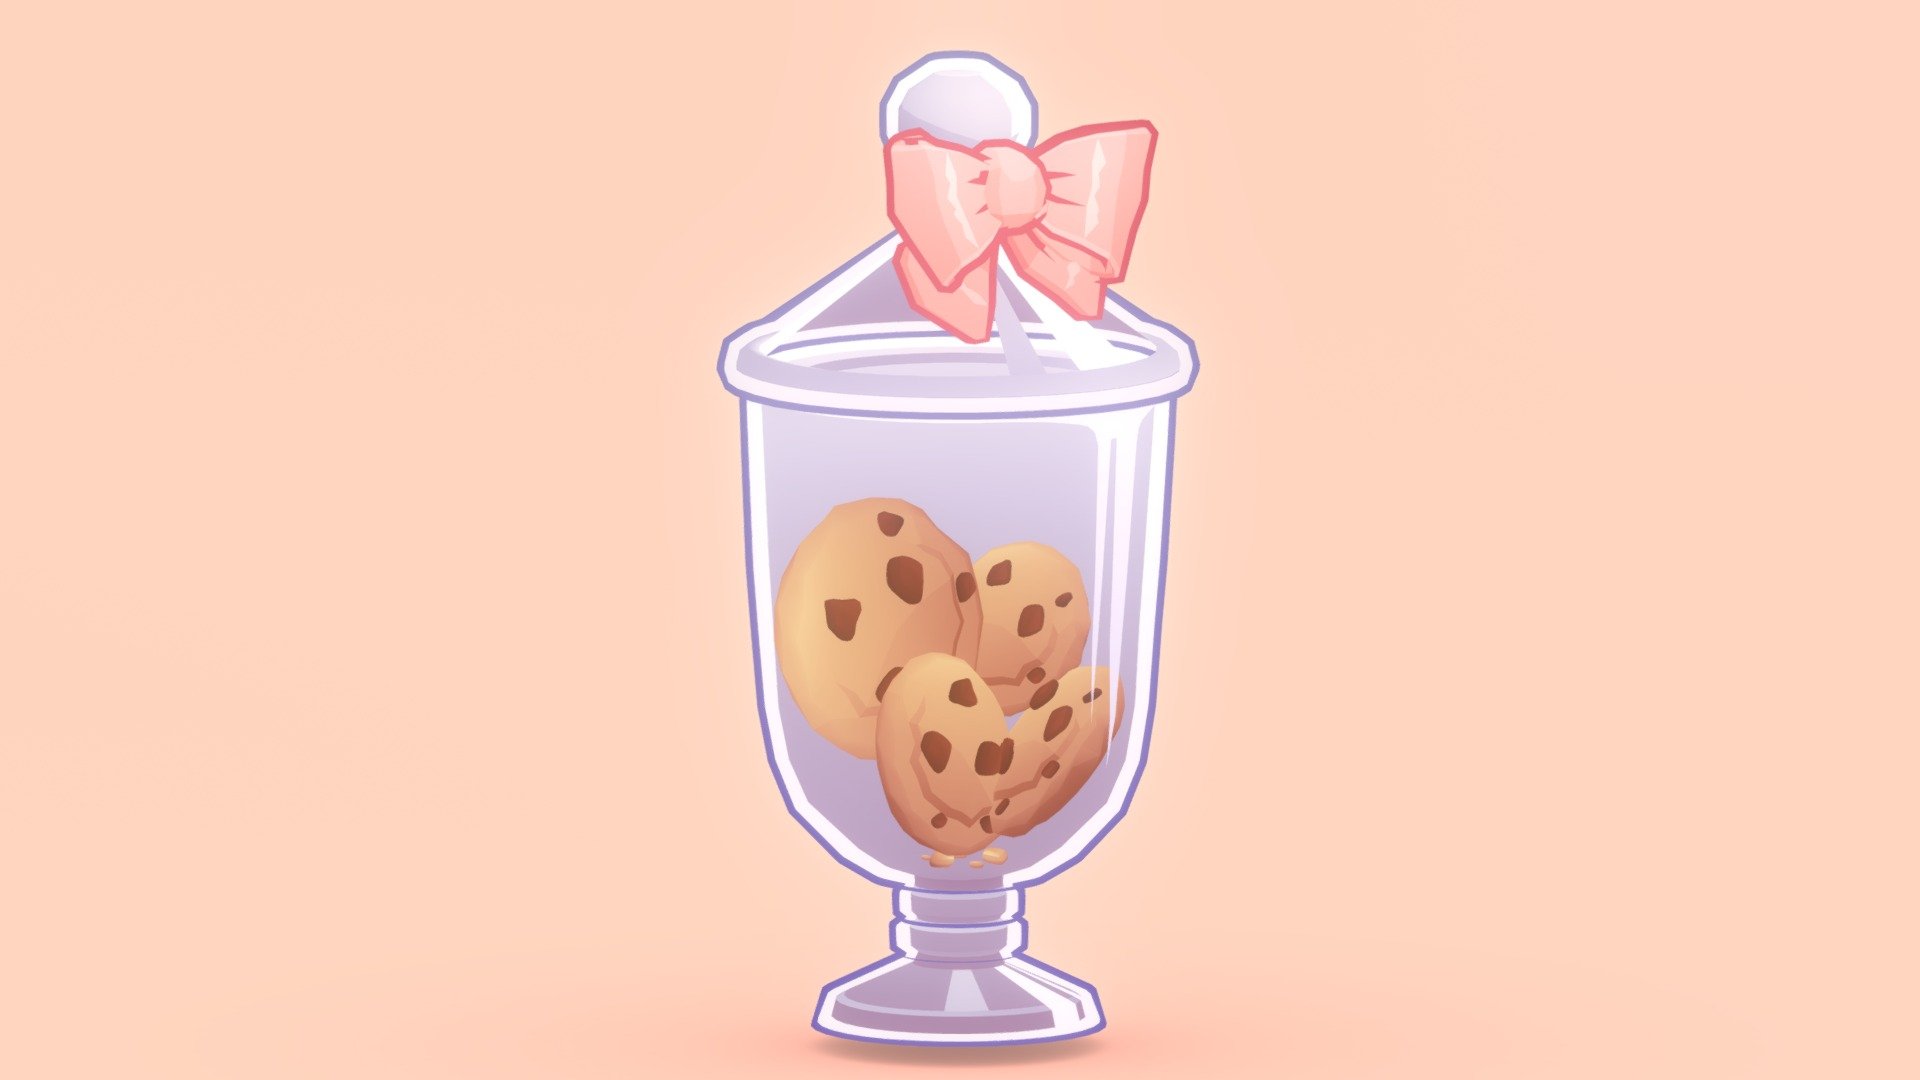 cute cookies jar.

Textured with gradient atlas, so it is performant for mobile games and video games.

Like a few of my other assets in the same style, it uses a single texture diffuse map and is mapped using only color gradients. 
All gradient textures can be extended and combined to a large atlas.

There are more assets in this style to add to your game scene or environment. Check out my sale.

If you want to change the colors of the assets, you just need to move the UVs on the atlas to a different gradient.
Or contact me for changes, for a small fee.

**I also accept freelance jobs. Do not hesitate to write me. **

*-------------Terms of Use--------------

Commercial use of the assets  provided is permitted but cannot be included in an asset pack or sold at any sort of asset/resource marketplace.*

9213140

5207418 - Cookies Jar - Buy Royalty Free 3D model by Stylized Box (@Stylized_Box) 3d model